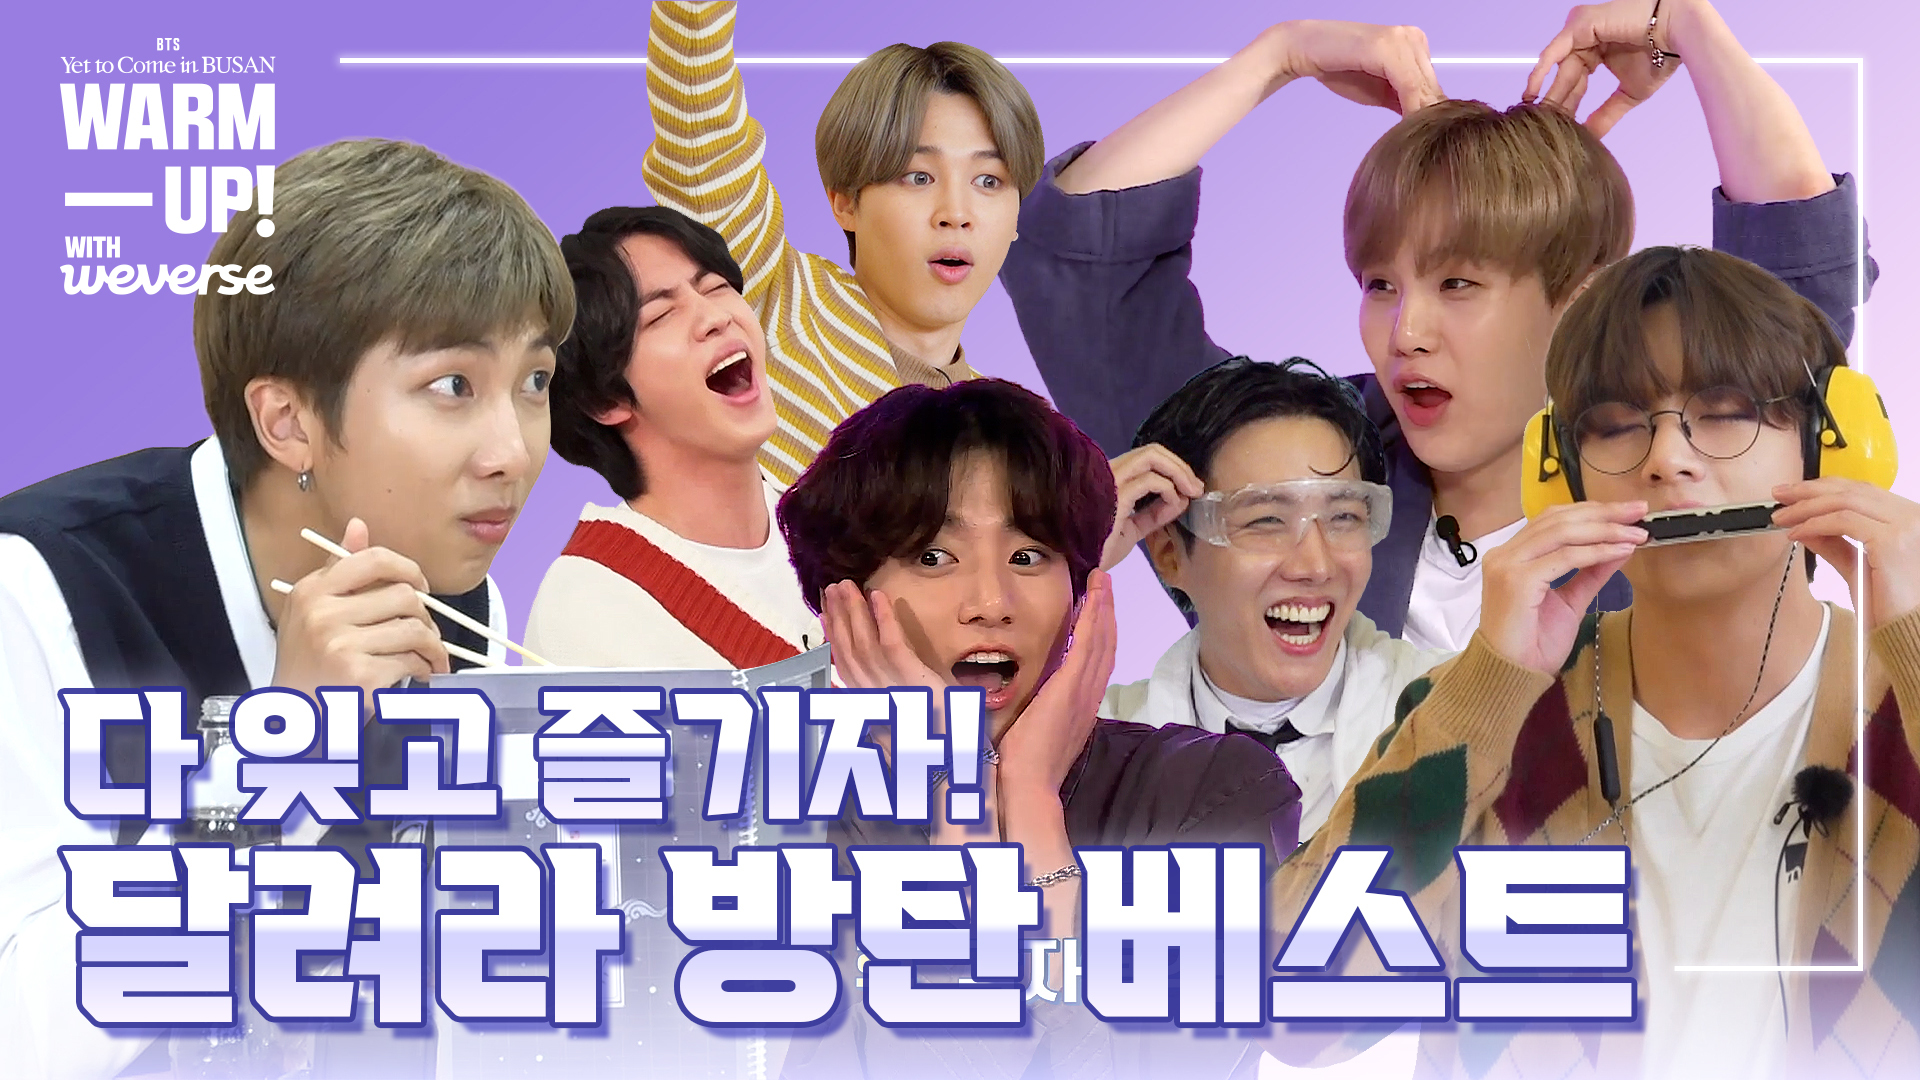 Have fun with Best of Run BTS!